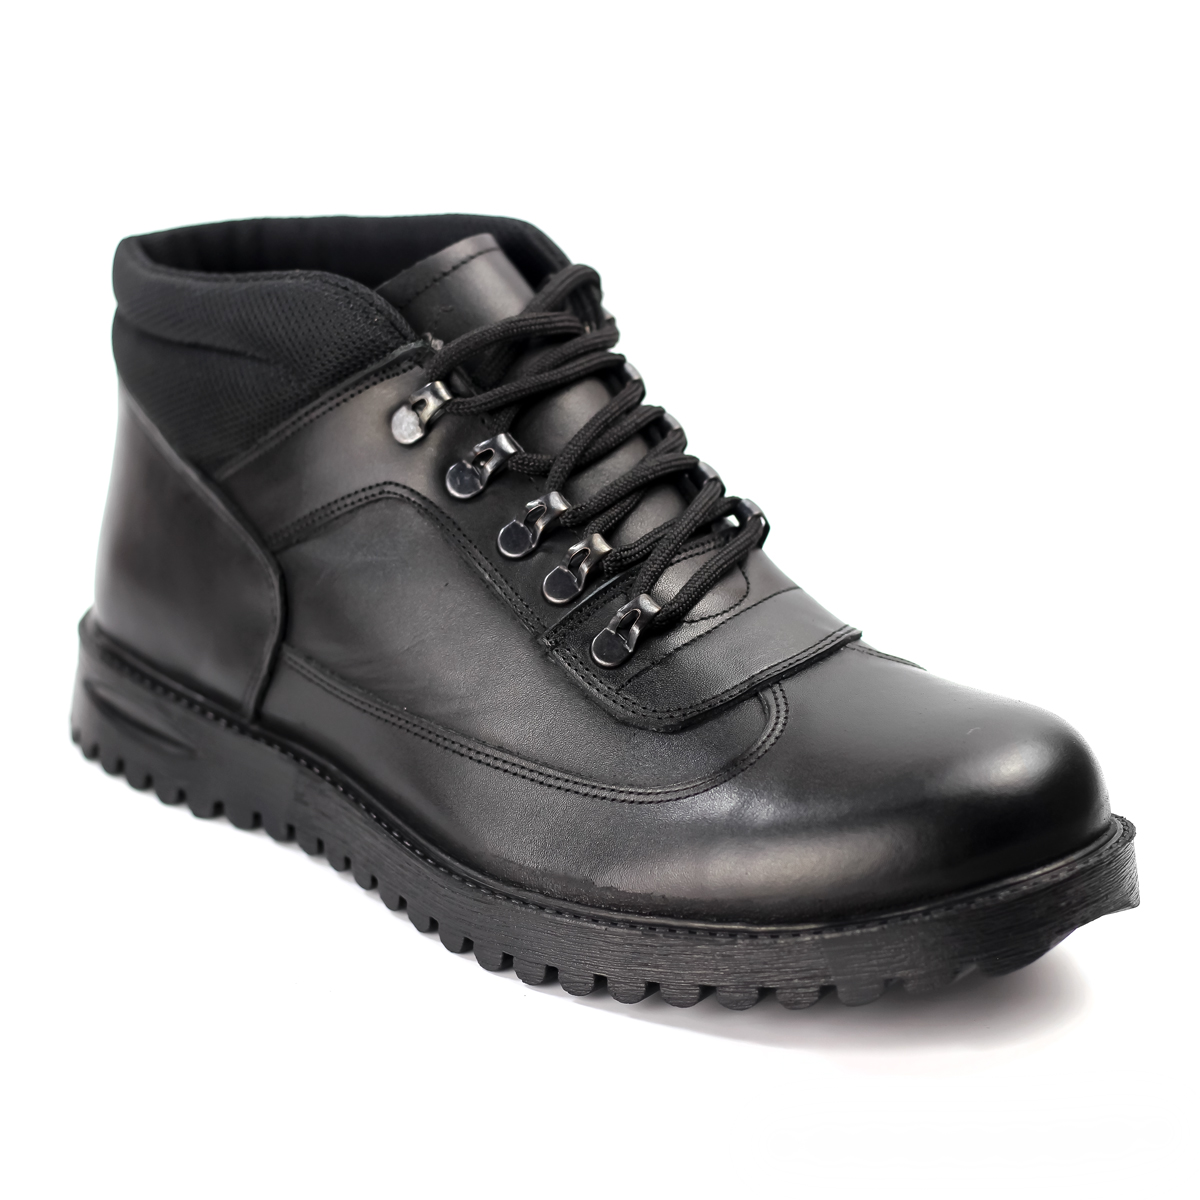 YEPA 117 PRIVATE SECURITY & POLICE BOOT